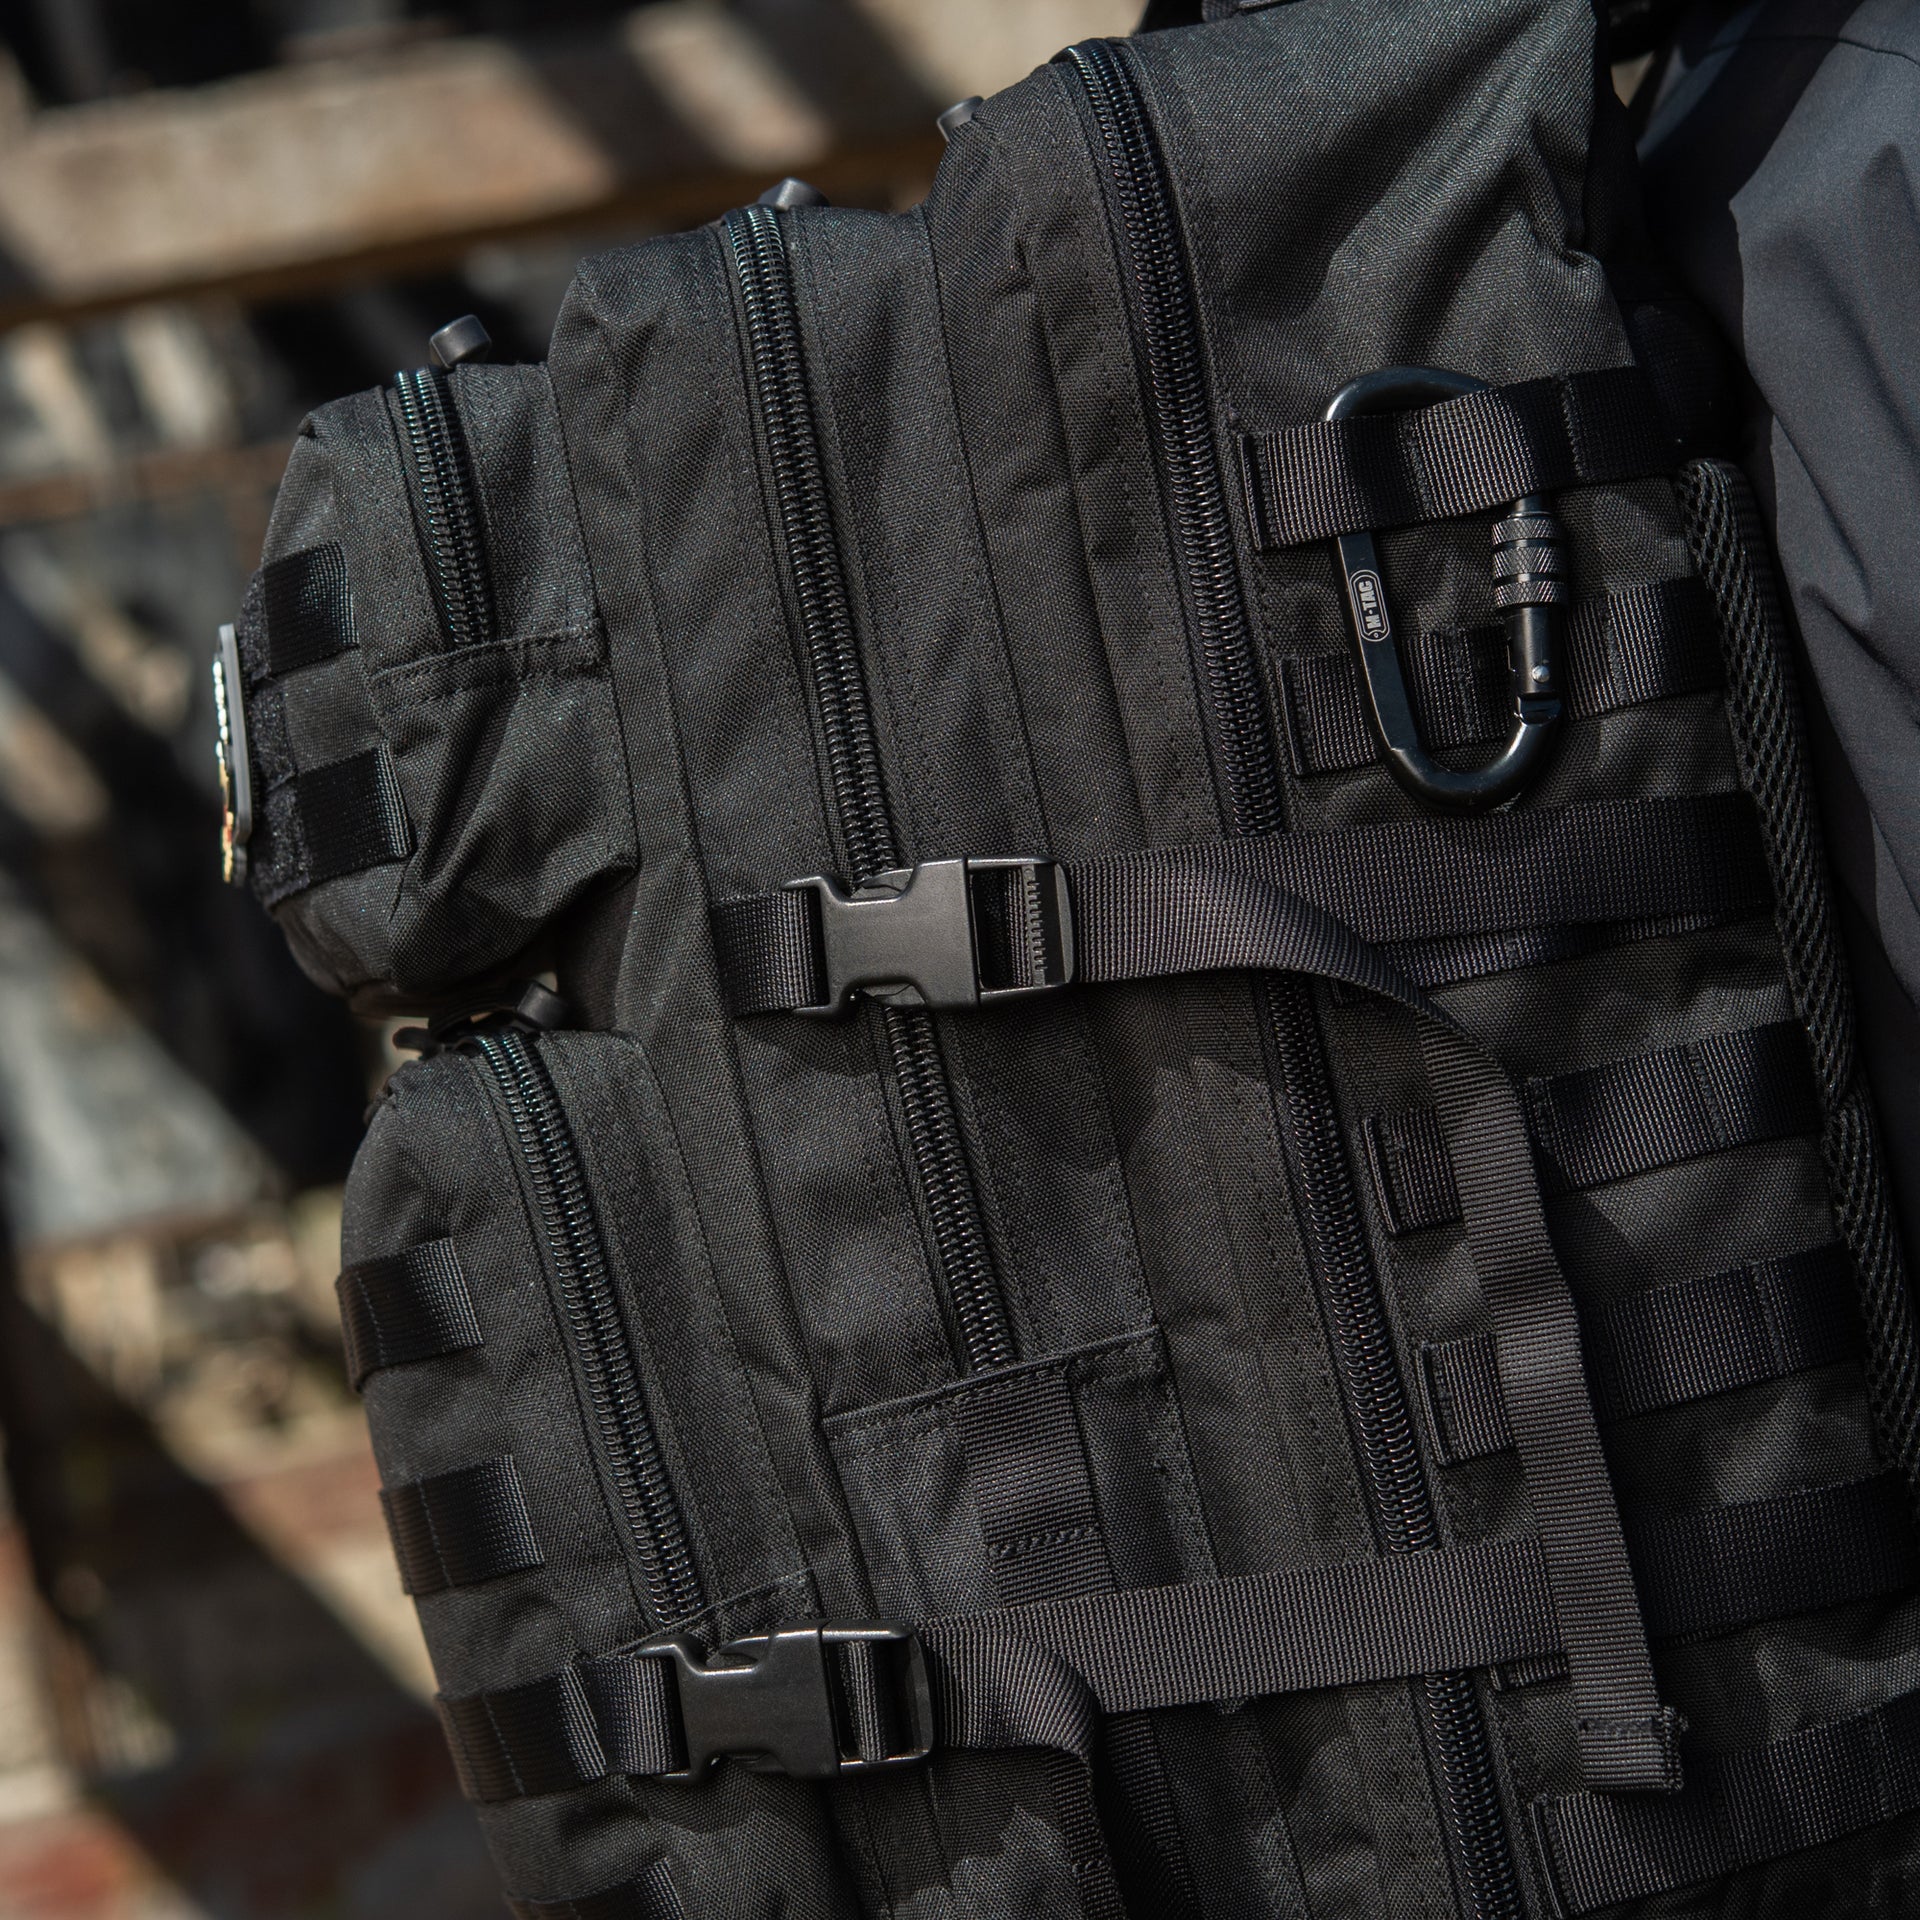 M-Tac Large Assault Pack with Molle Fastening System